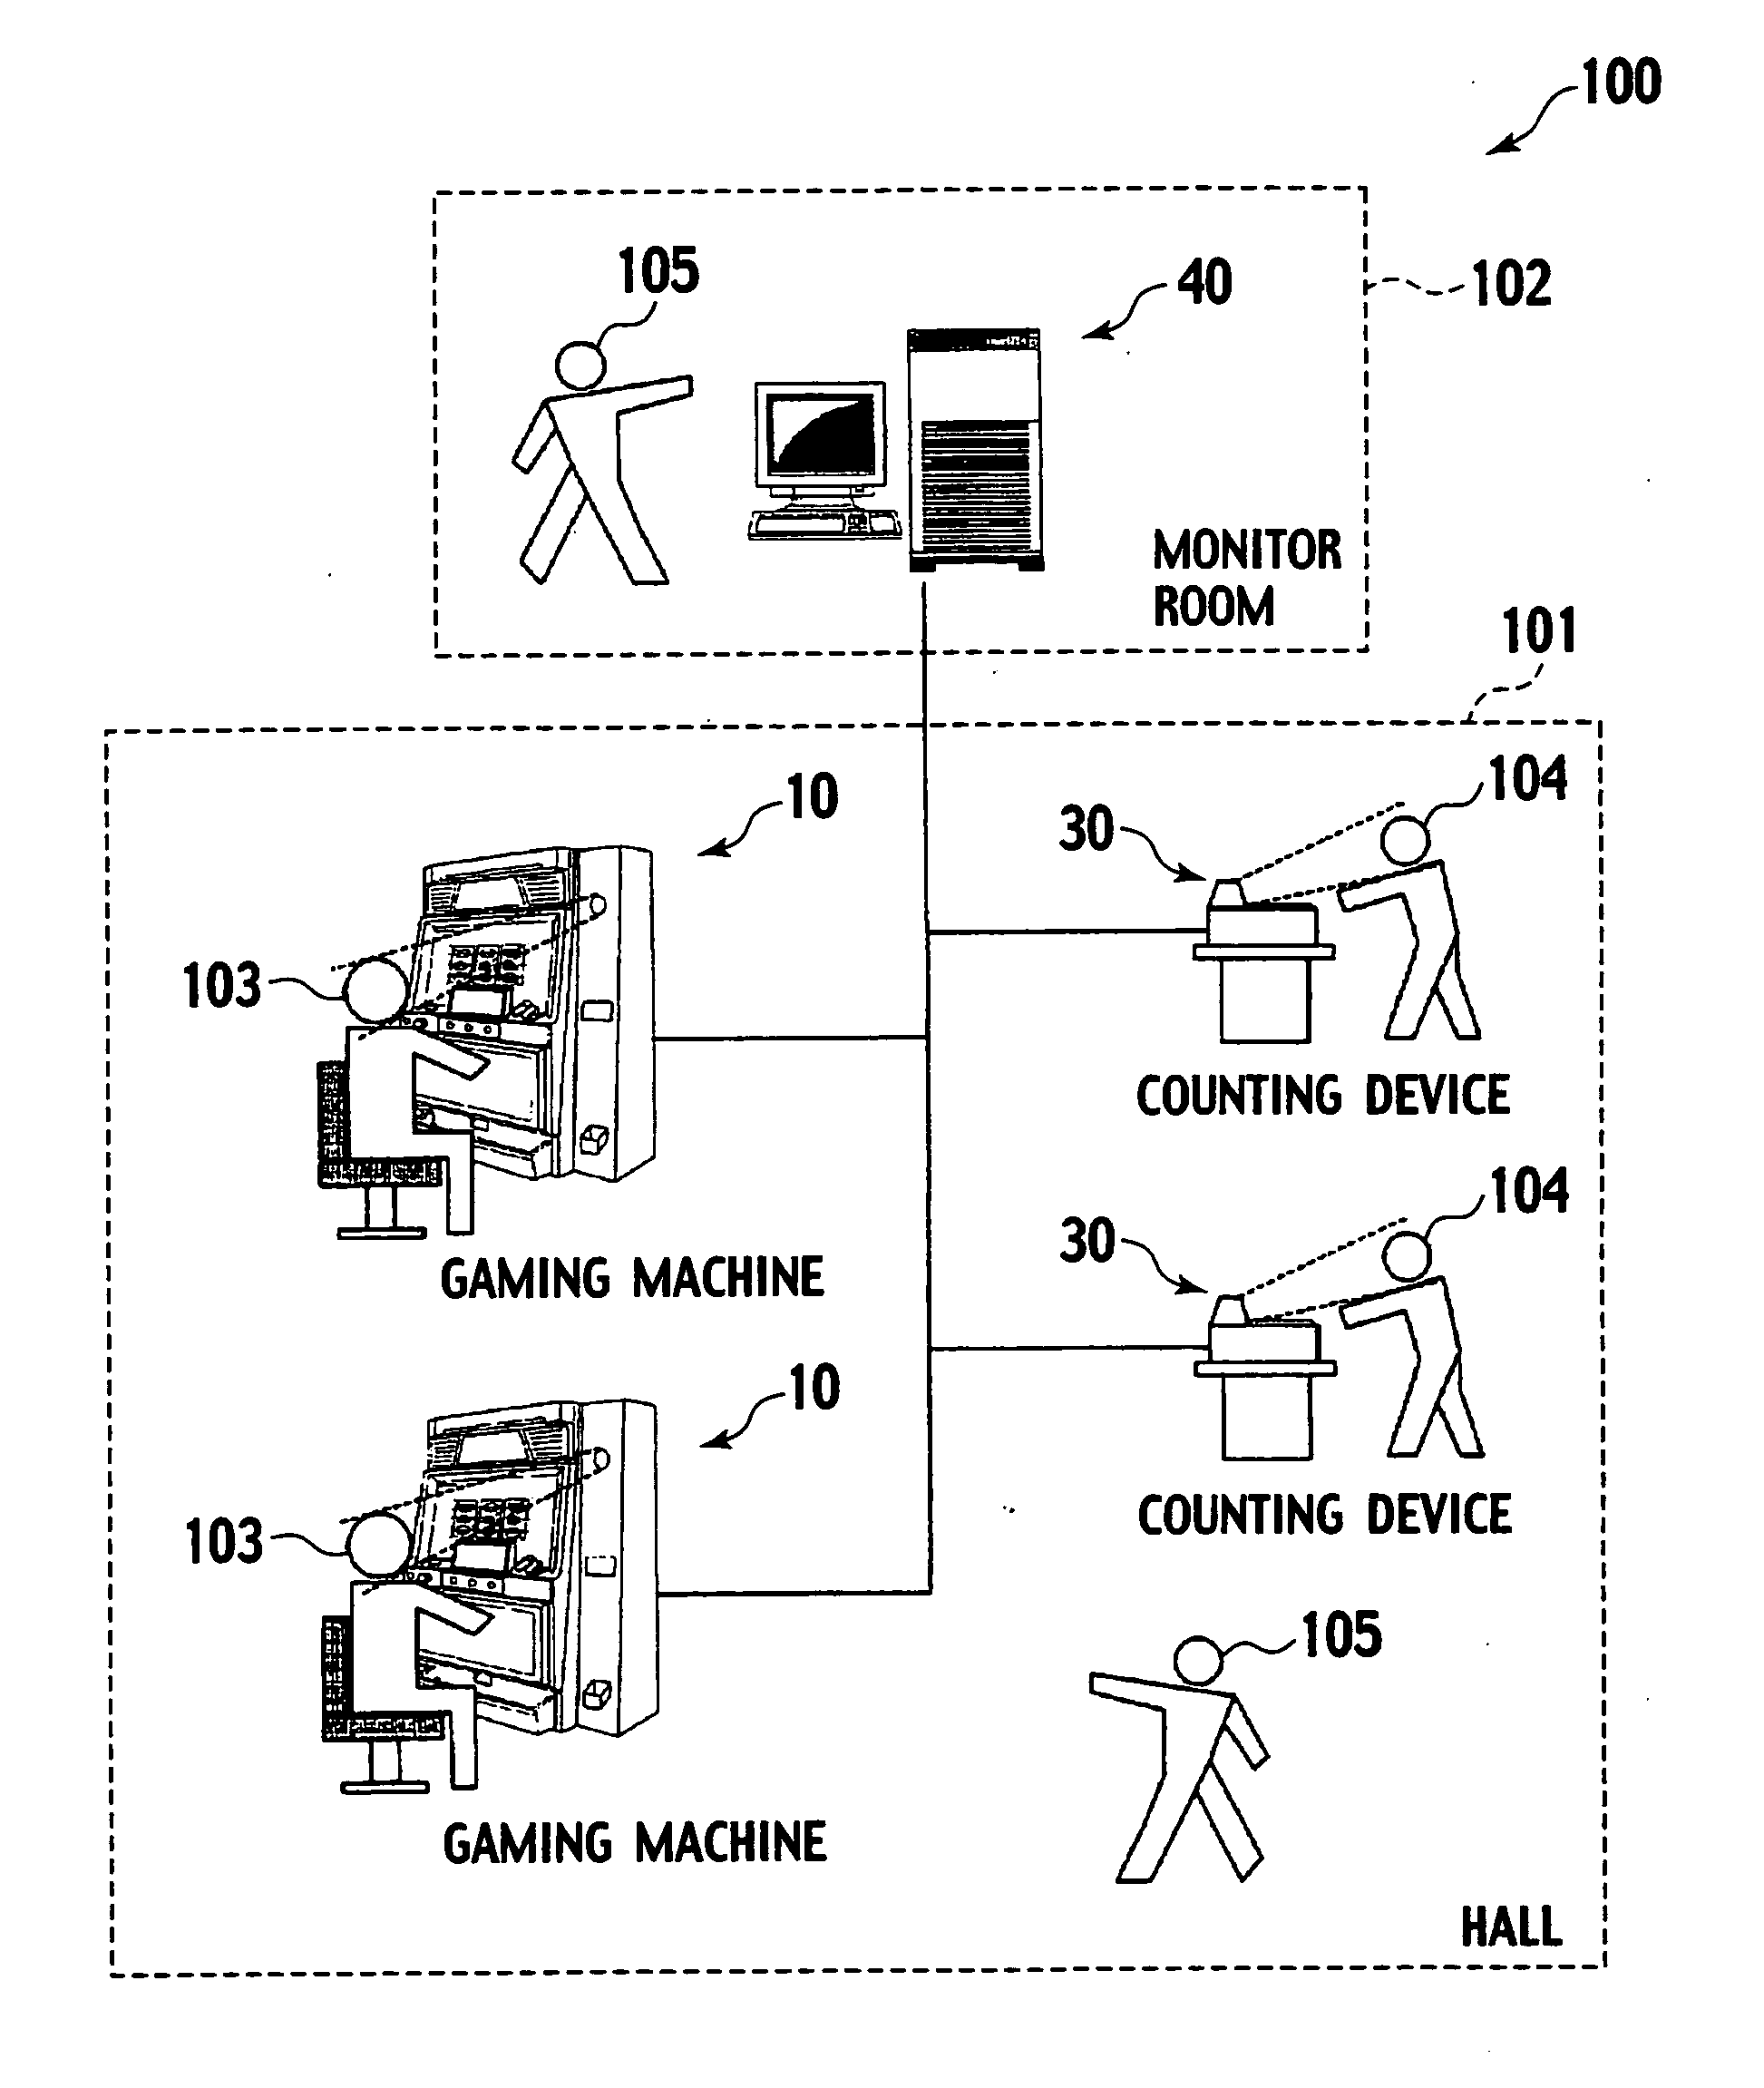 Player authentication device, player management server, gaming machine and sandwiched device